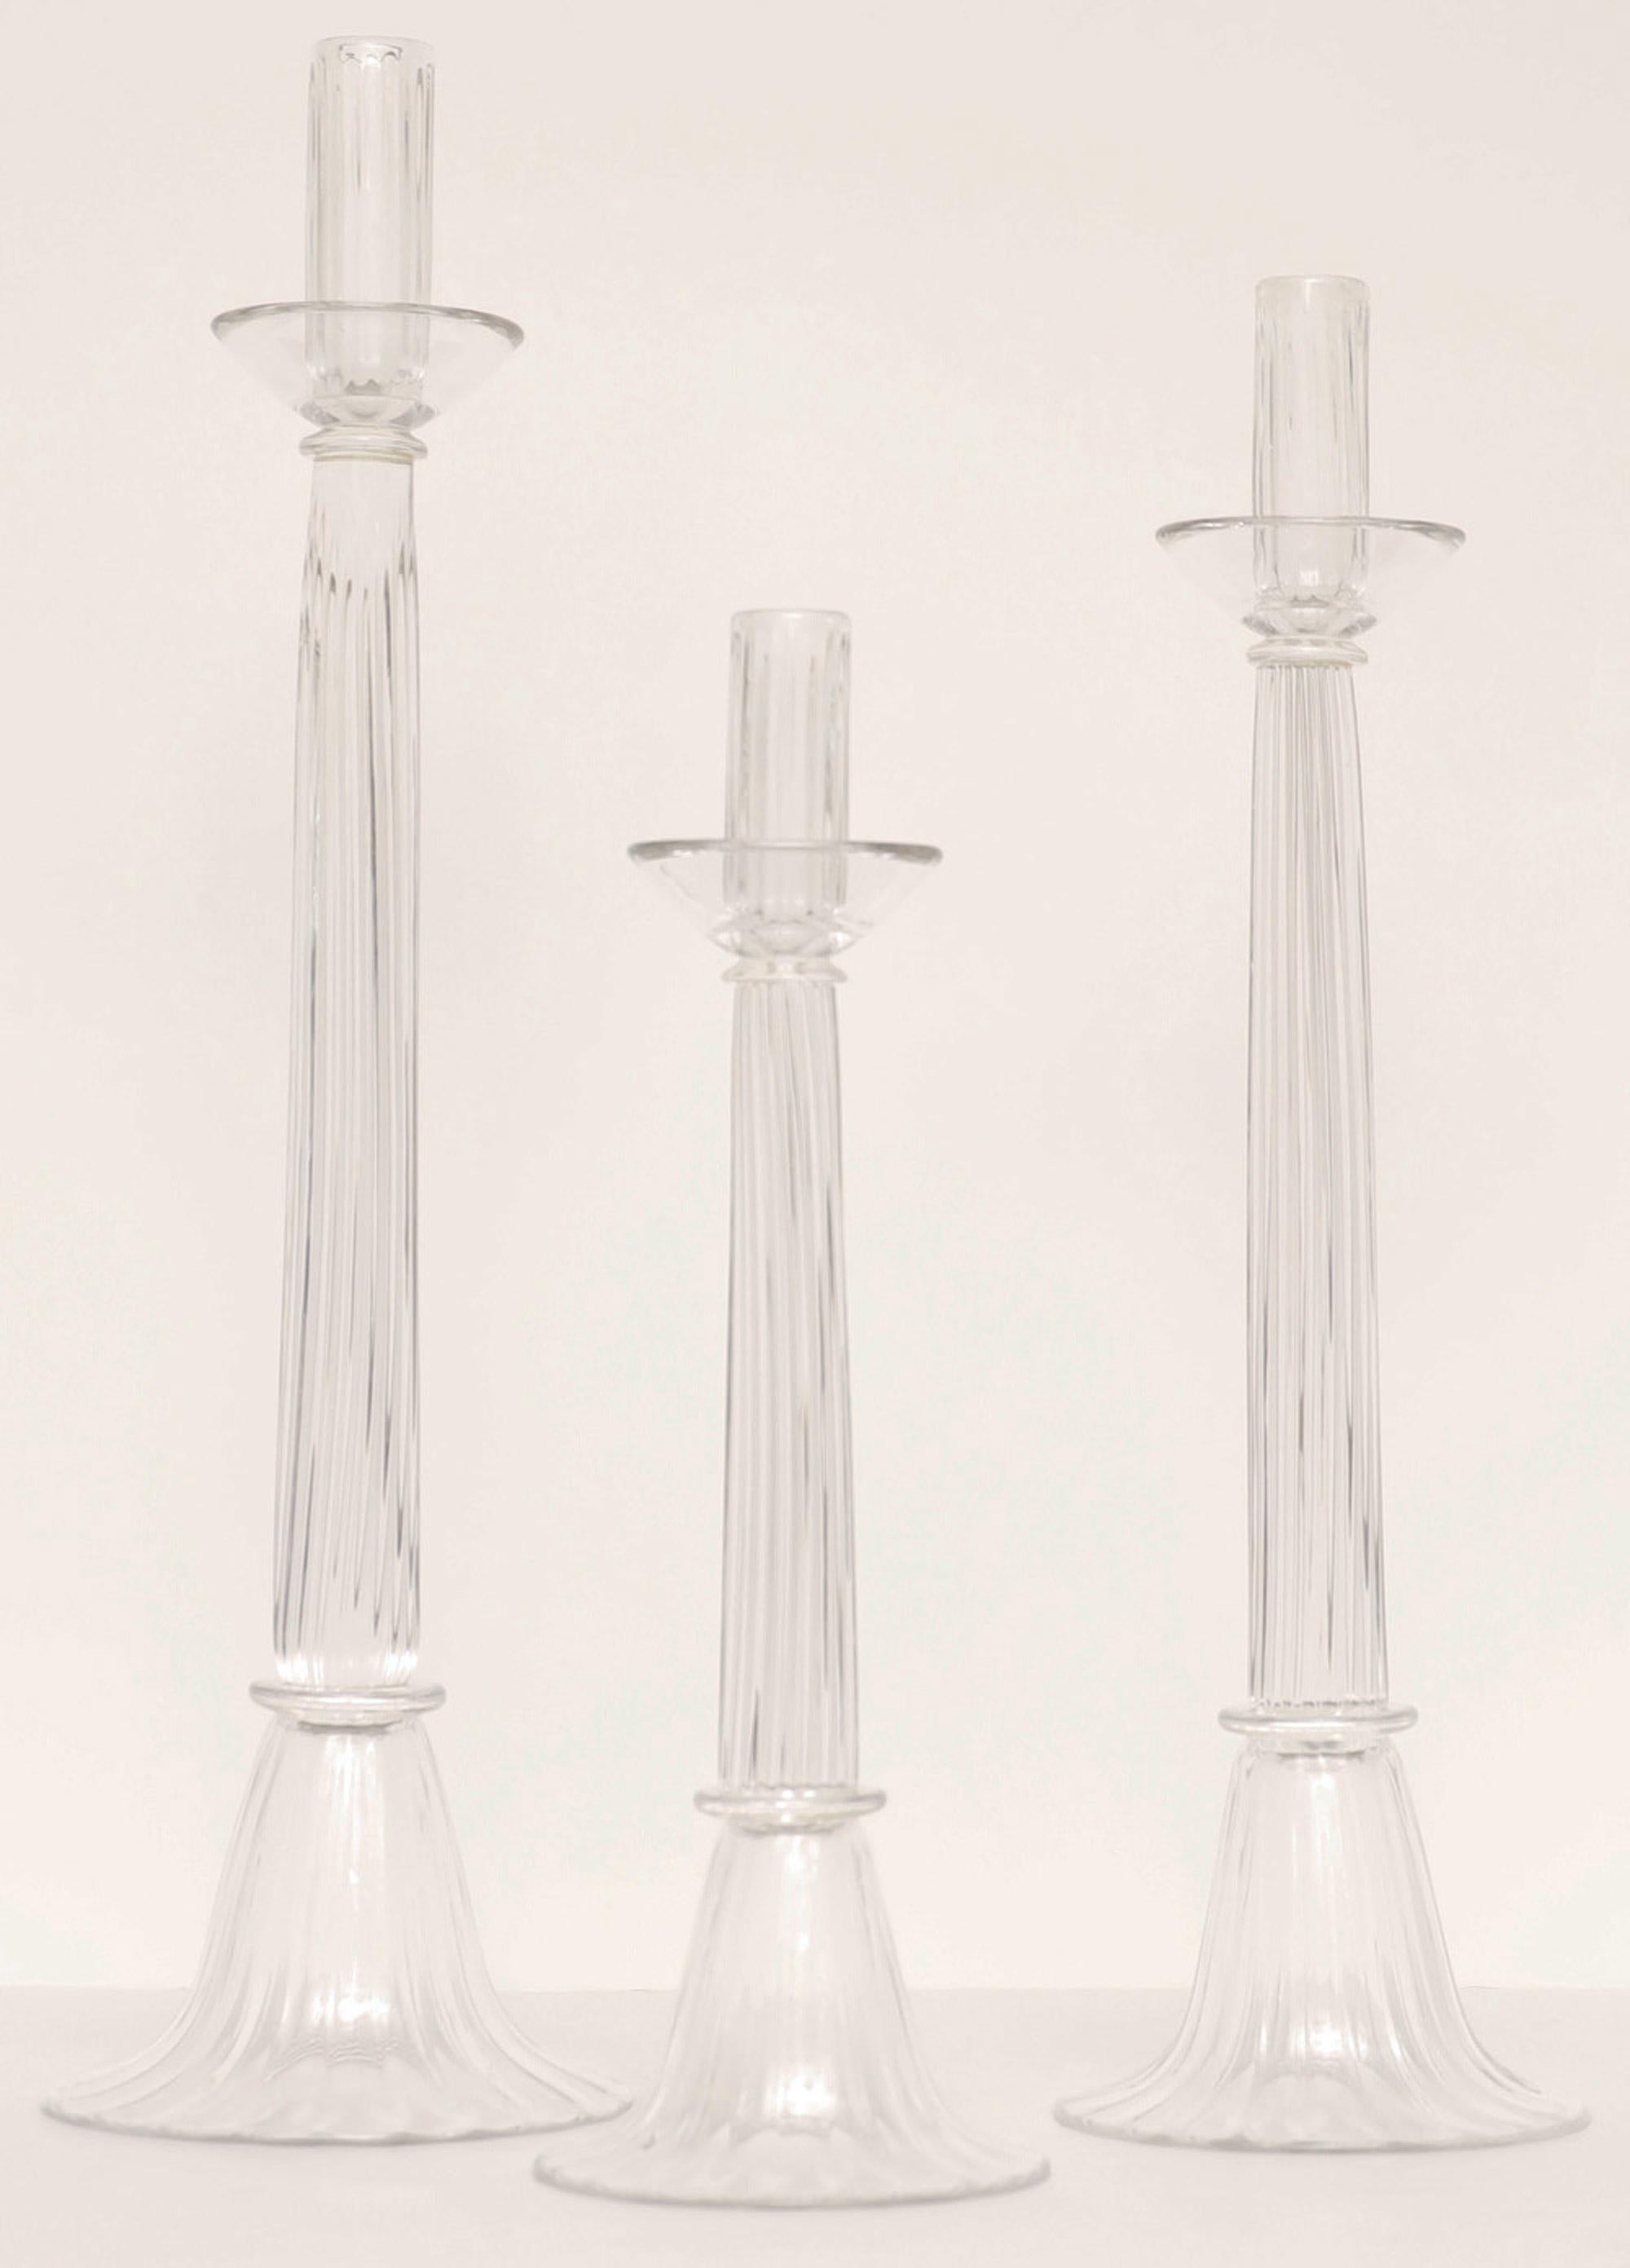 A trio of clear Murano glass candle stick holders by Luigi Mellara
Each one is hand blown with artist's signature engraved in the base.
Perfect in any setting ...

Elegant and simple !

Measurements below in additional comments.